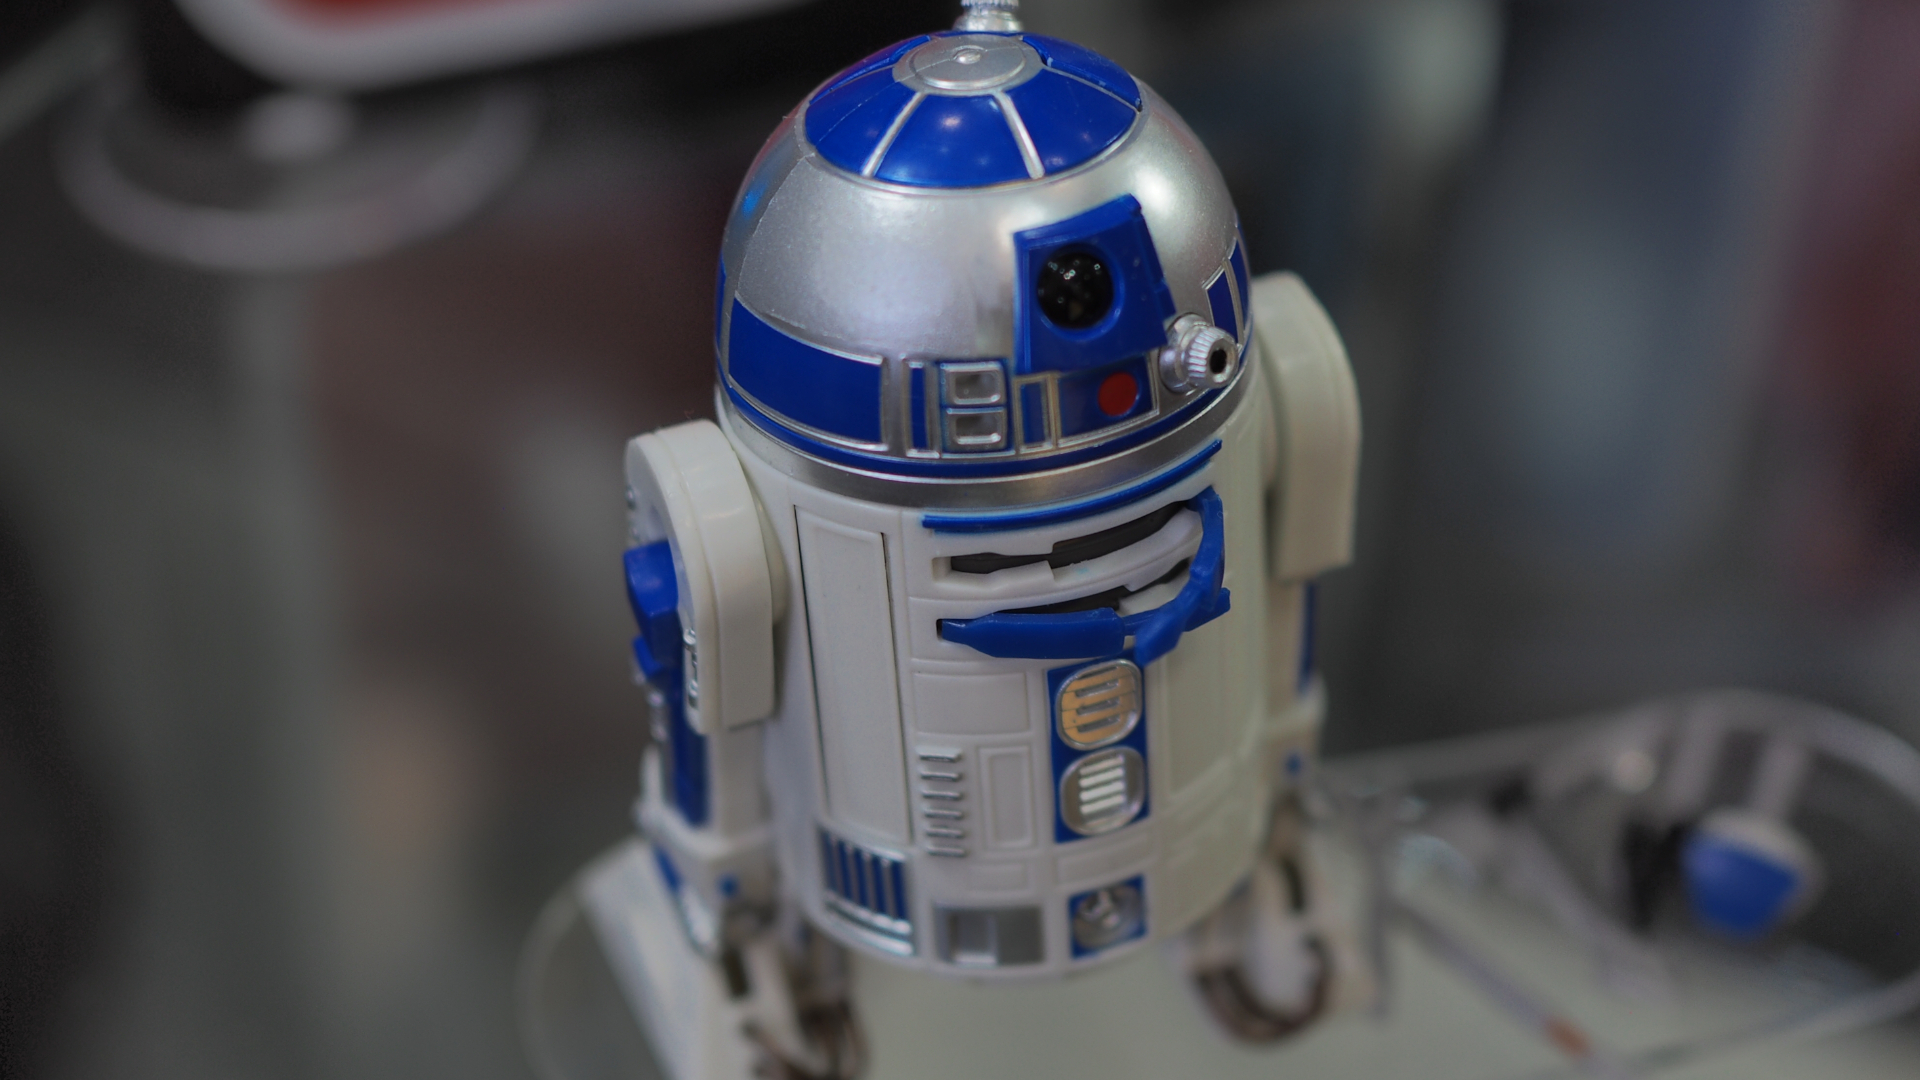 An action figure of R2-D2 stands with certain accessories out